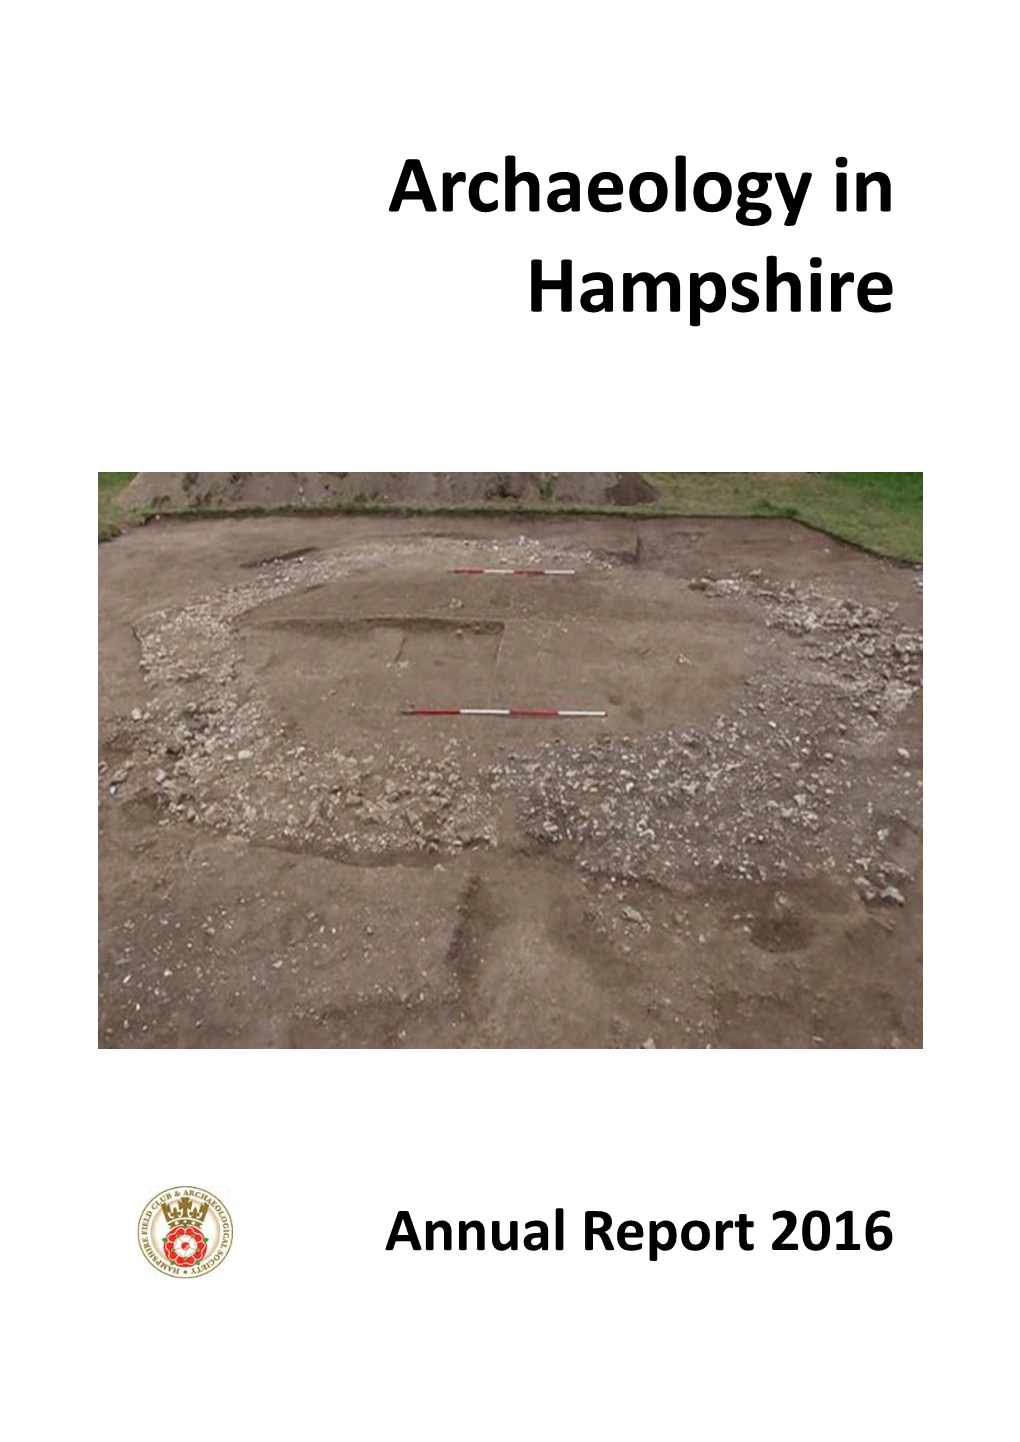 Archaeology in Hampshire for 2016